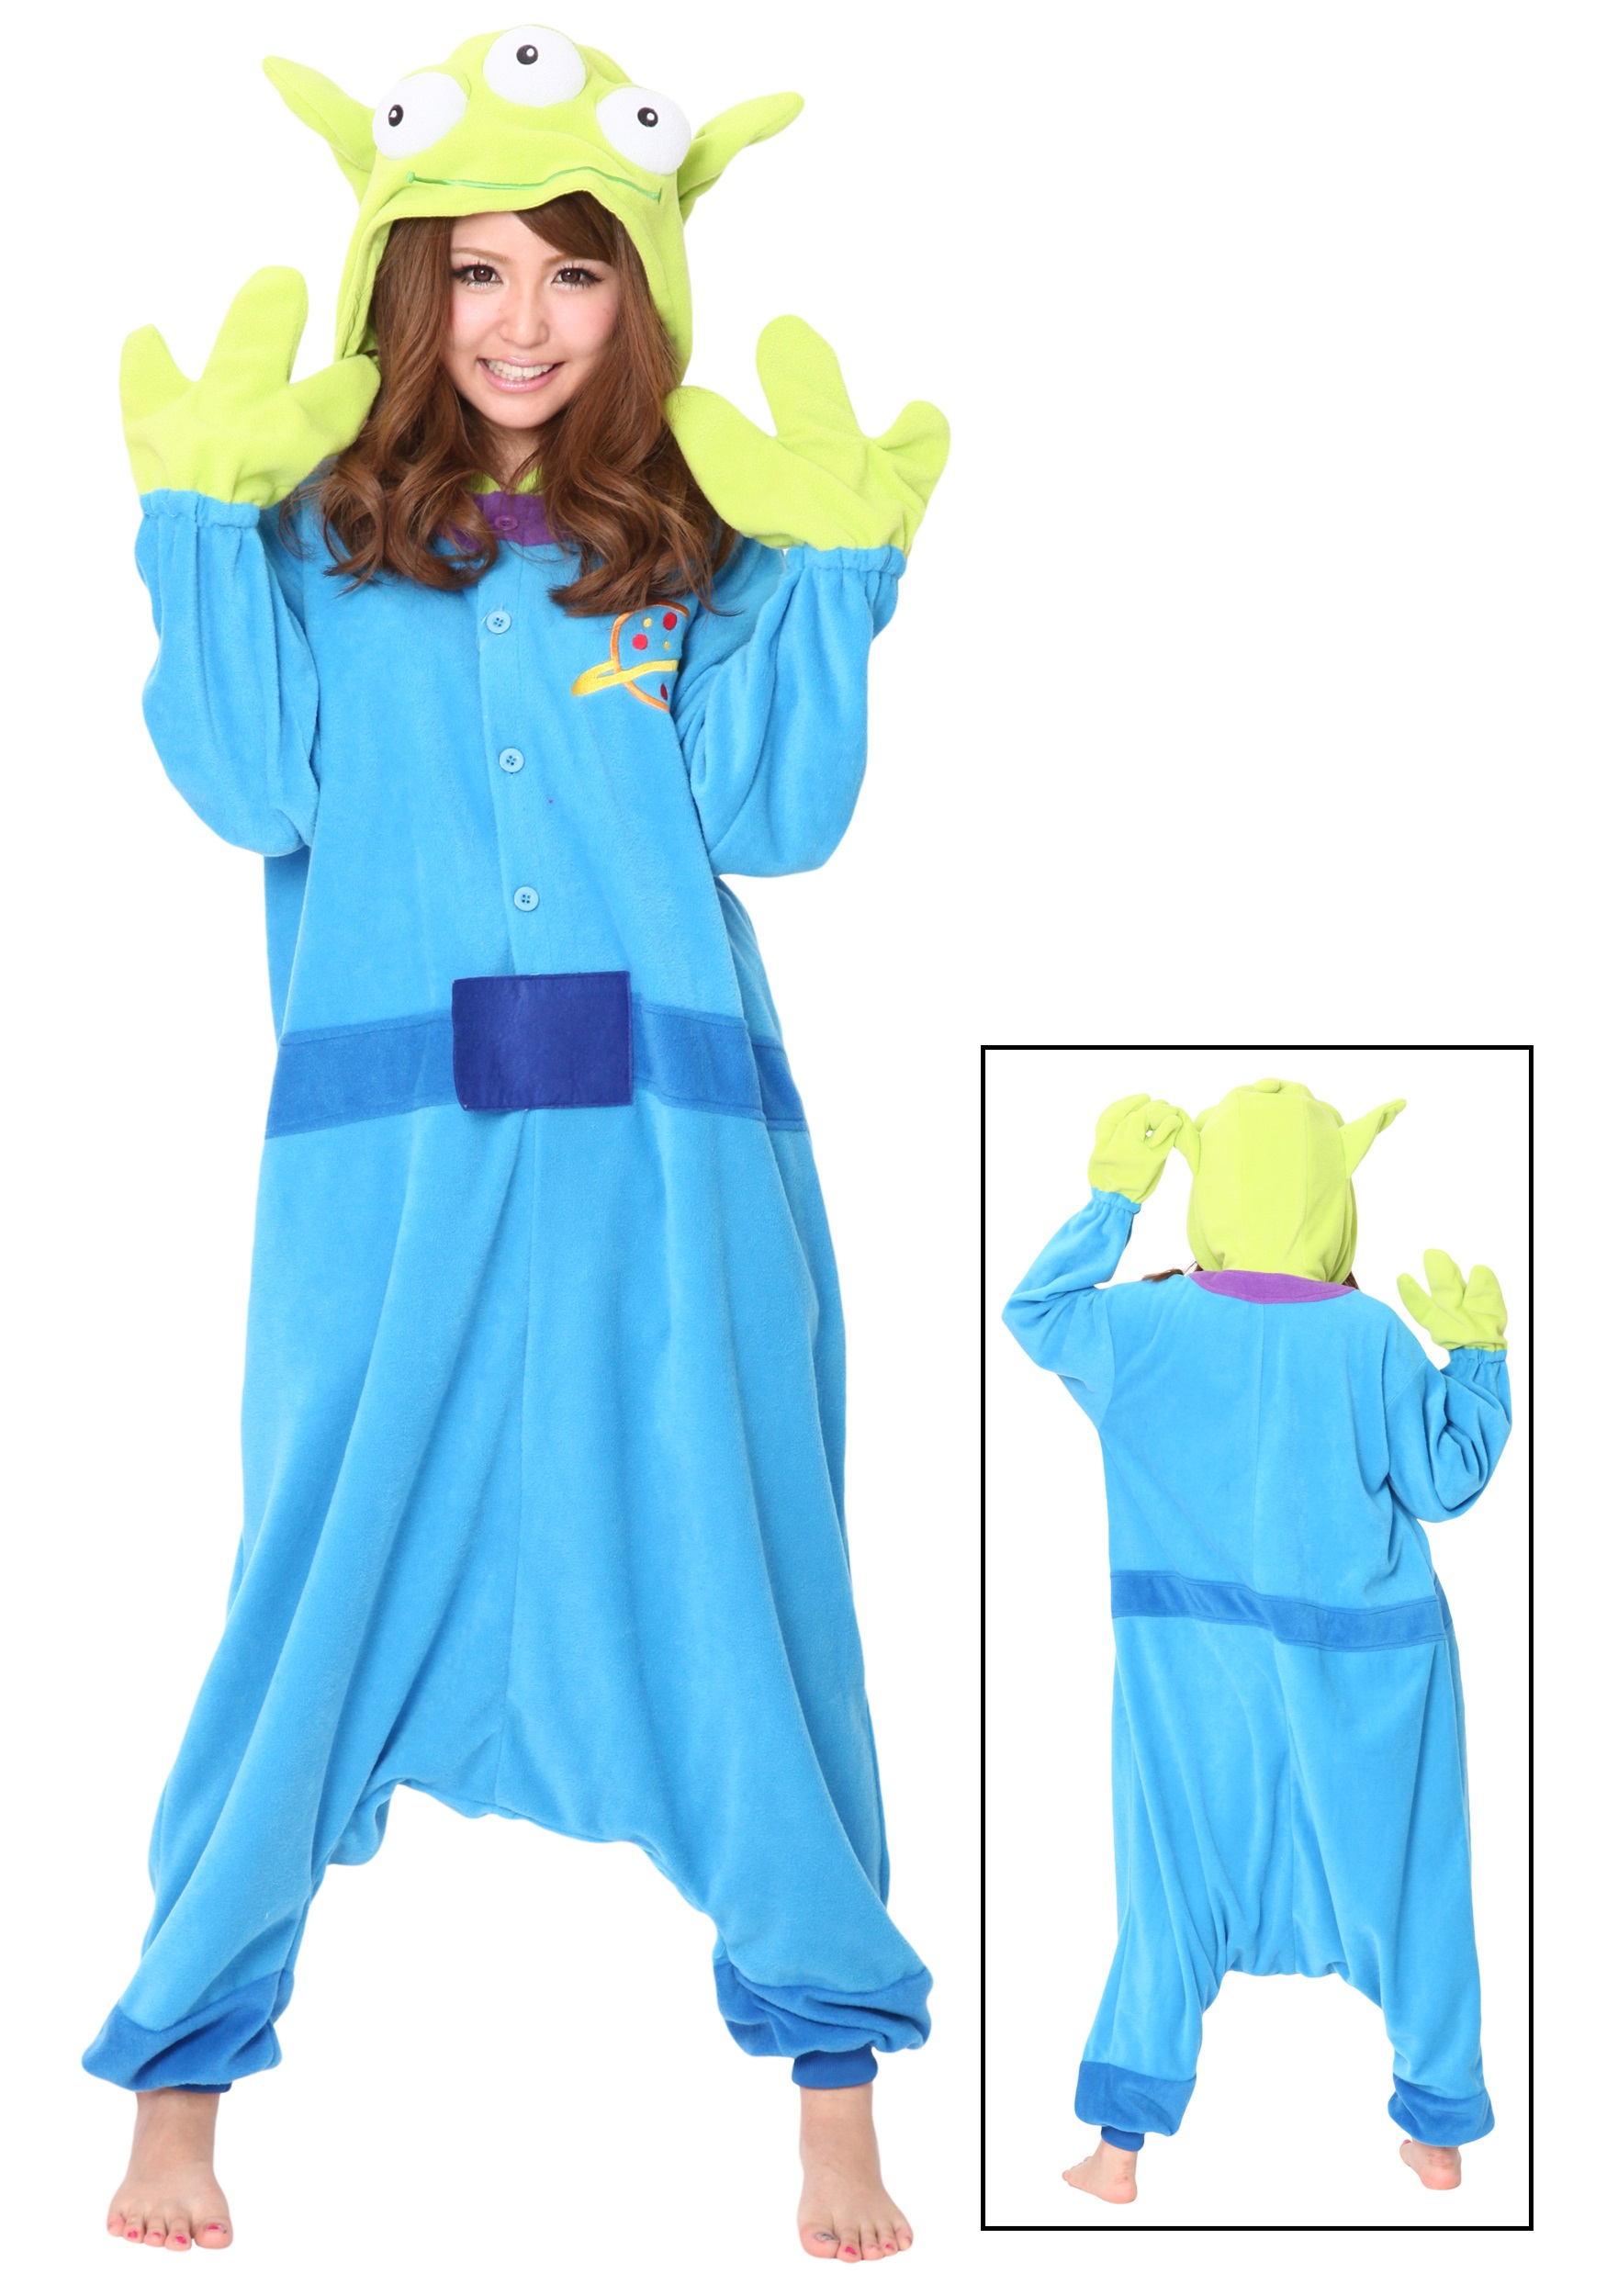 Alien Pajama Costume with Free Shipping in U.S., UK, Europe, Canada | Order...